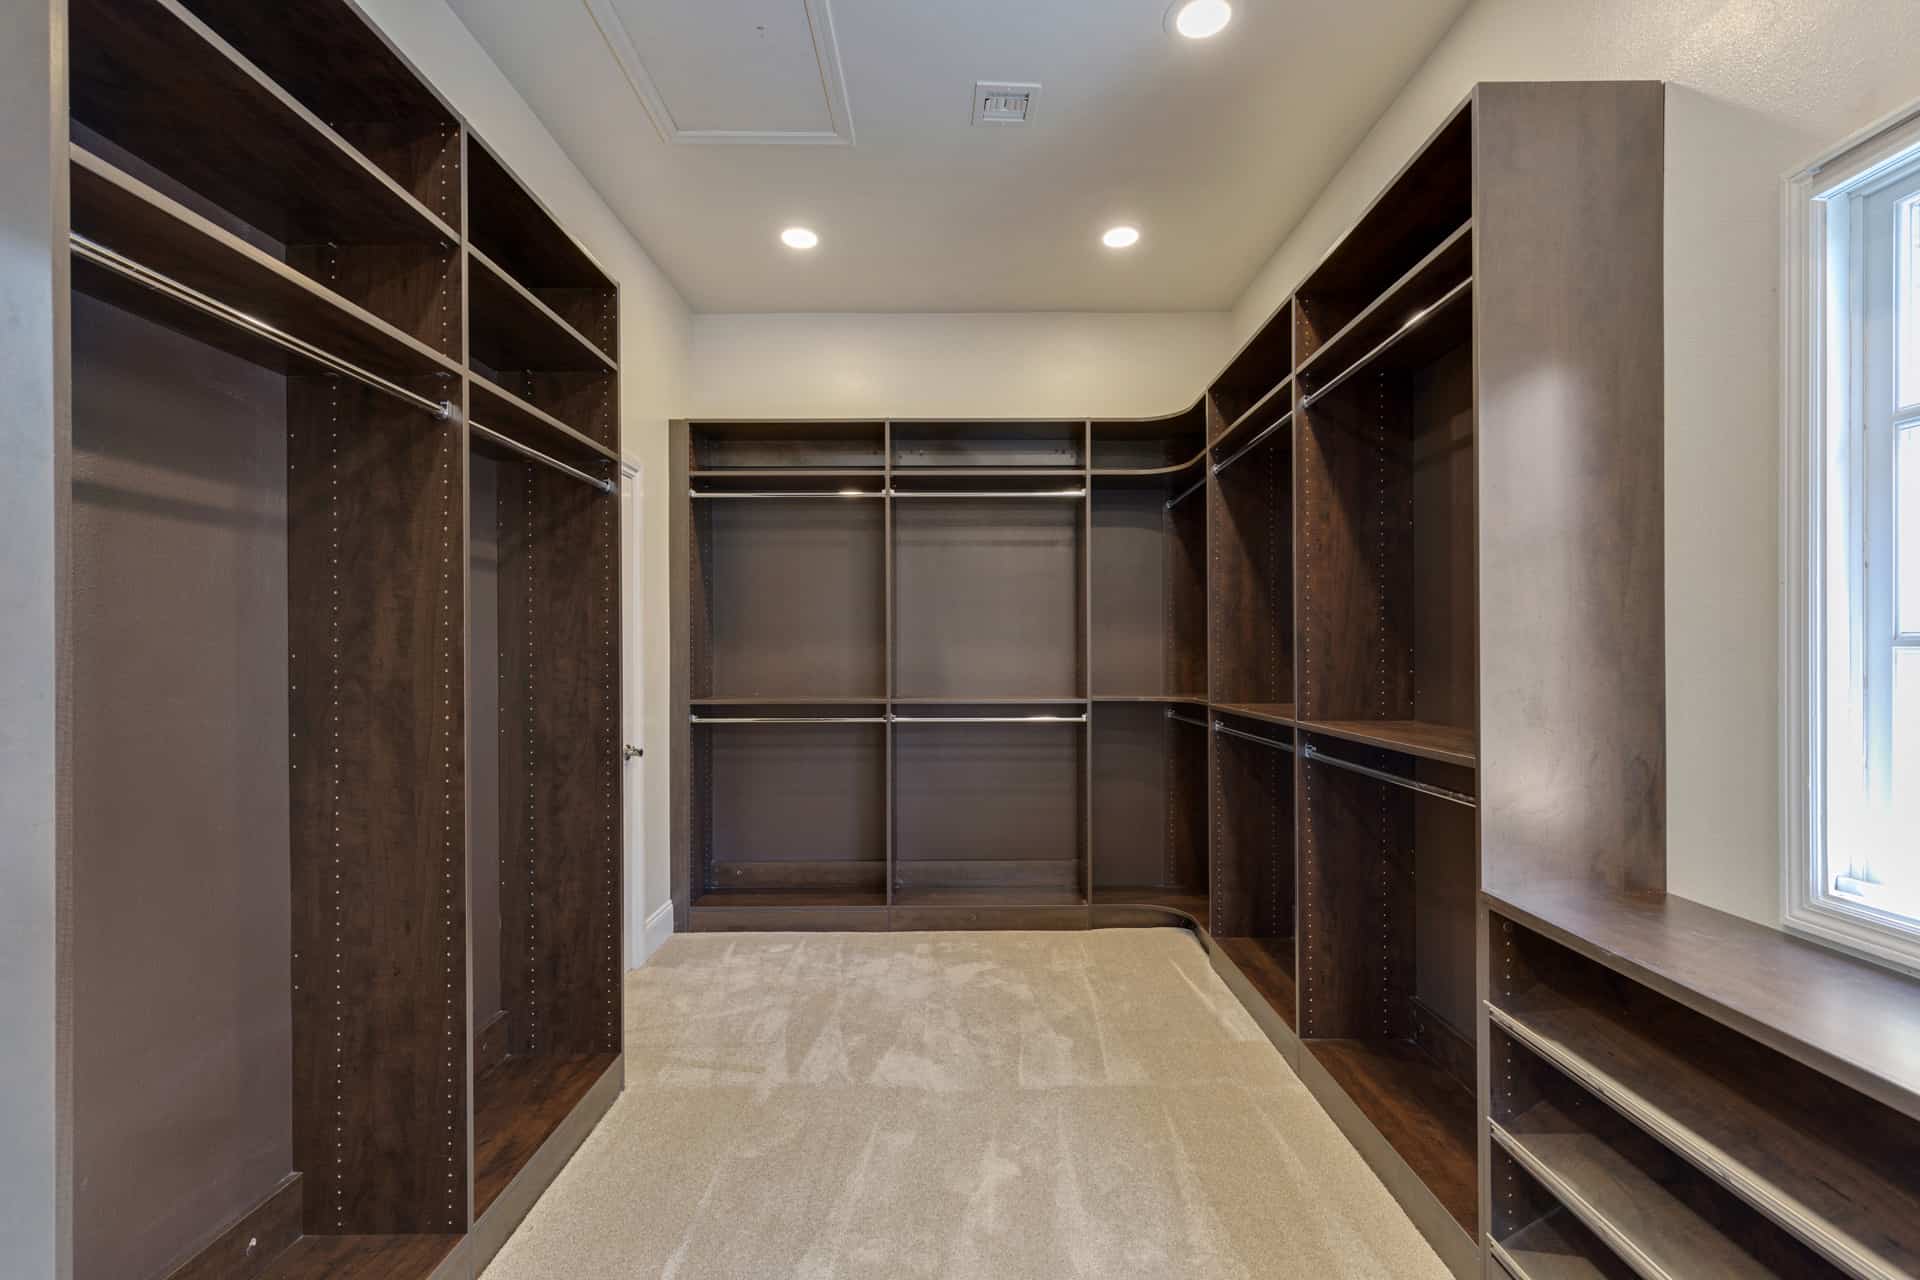 larger of the two walk-in closets